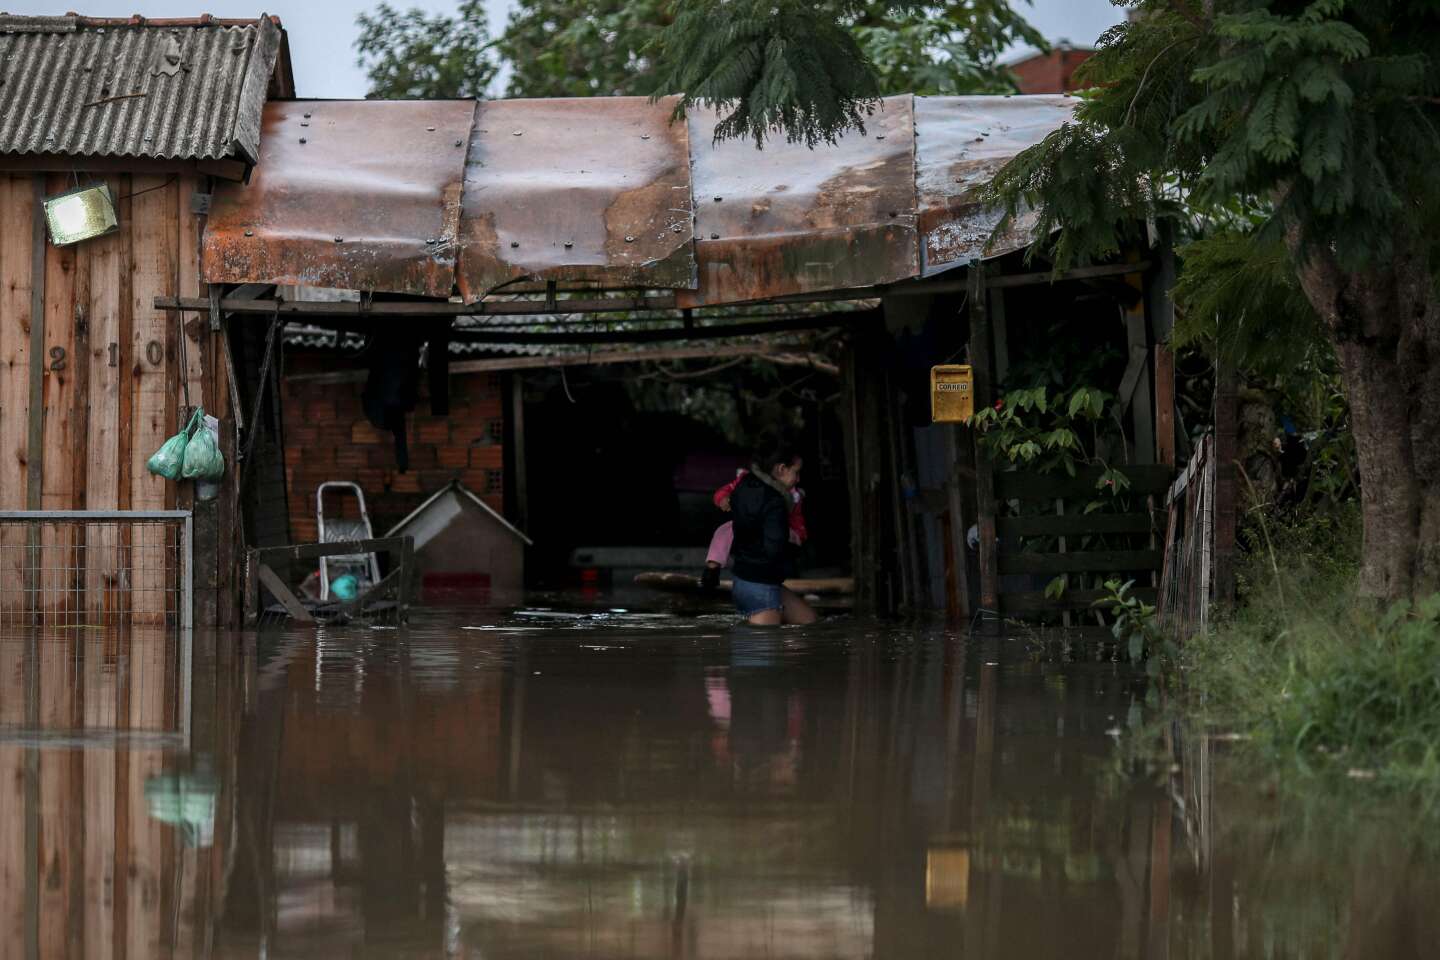 In Brazil, floods leave 37 dead and 74 missing